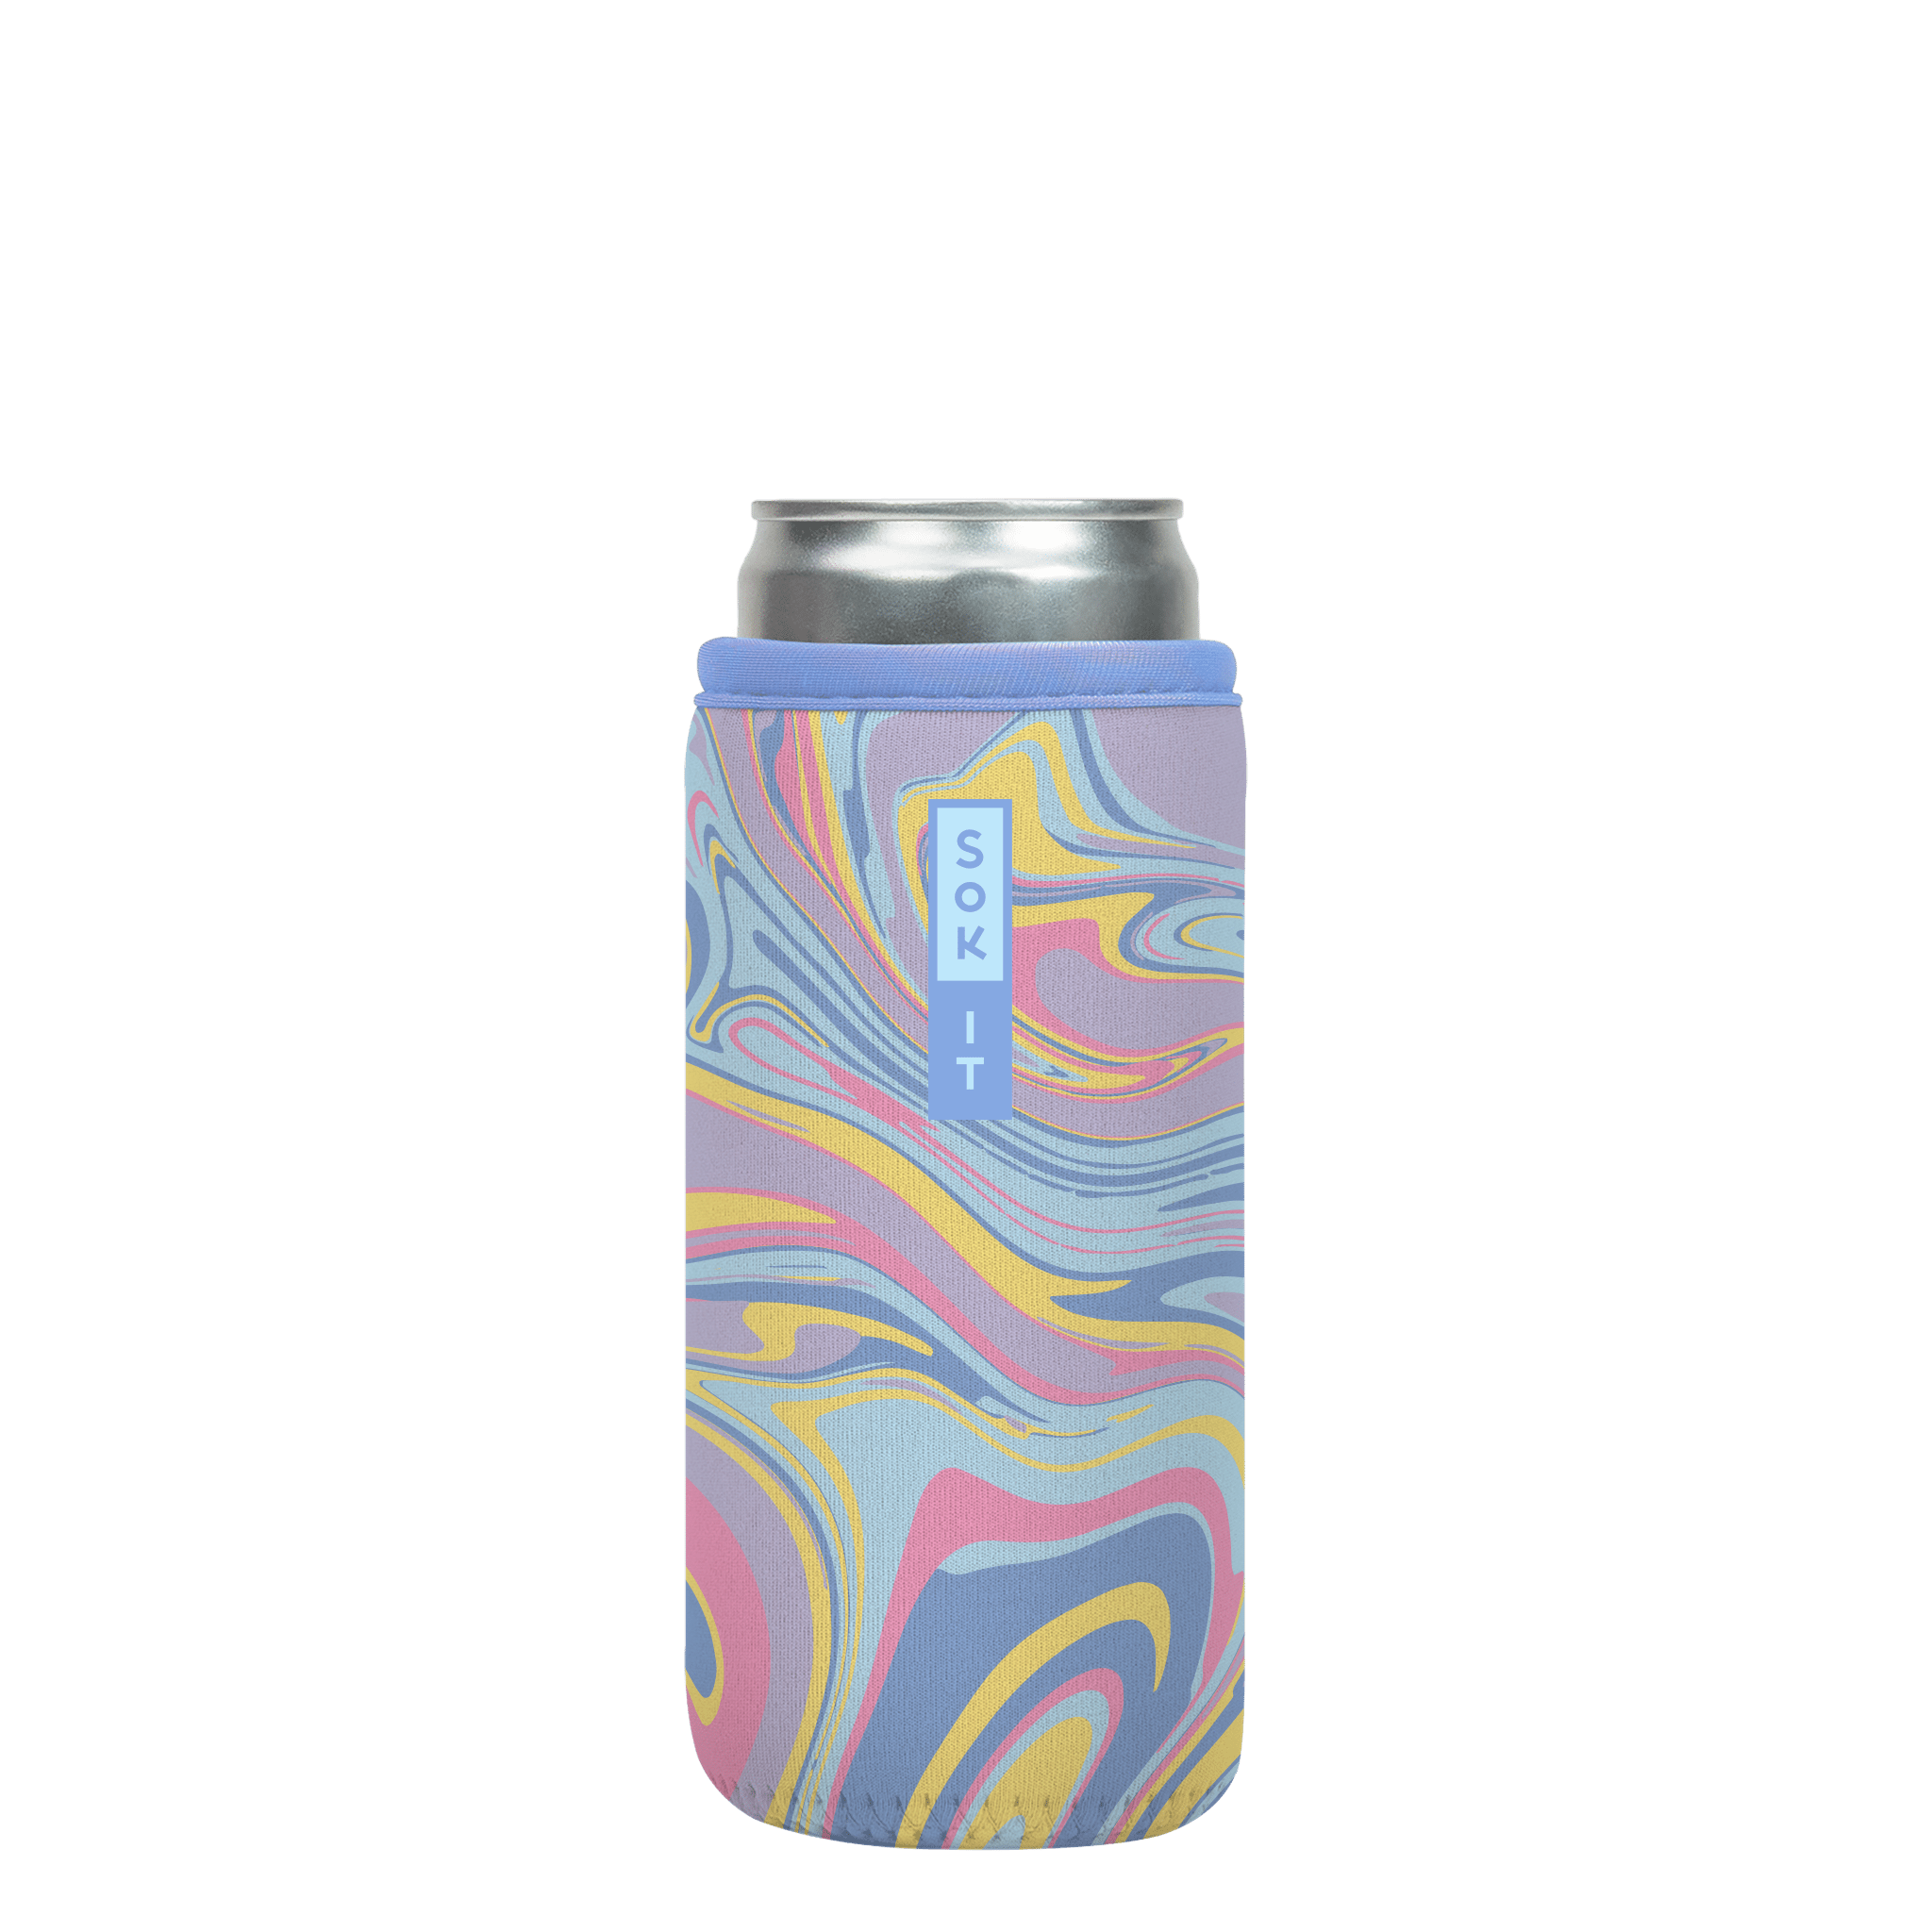 CanSok Psychedelic Swirl 12oz Slim Can